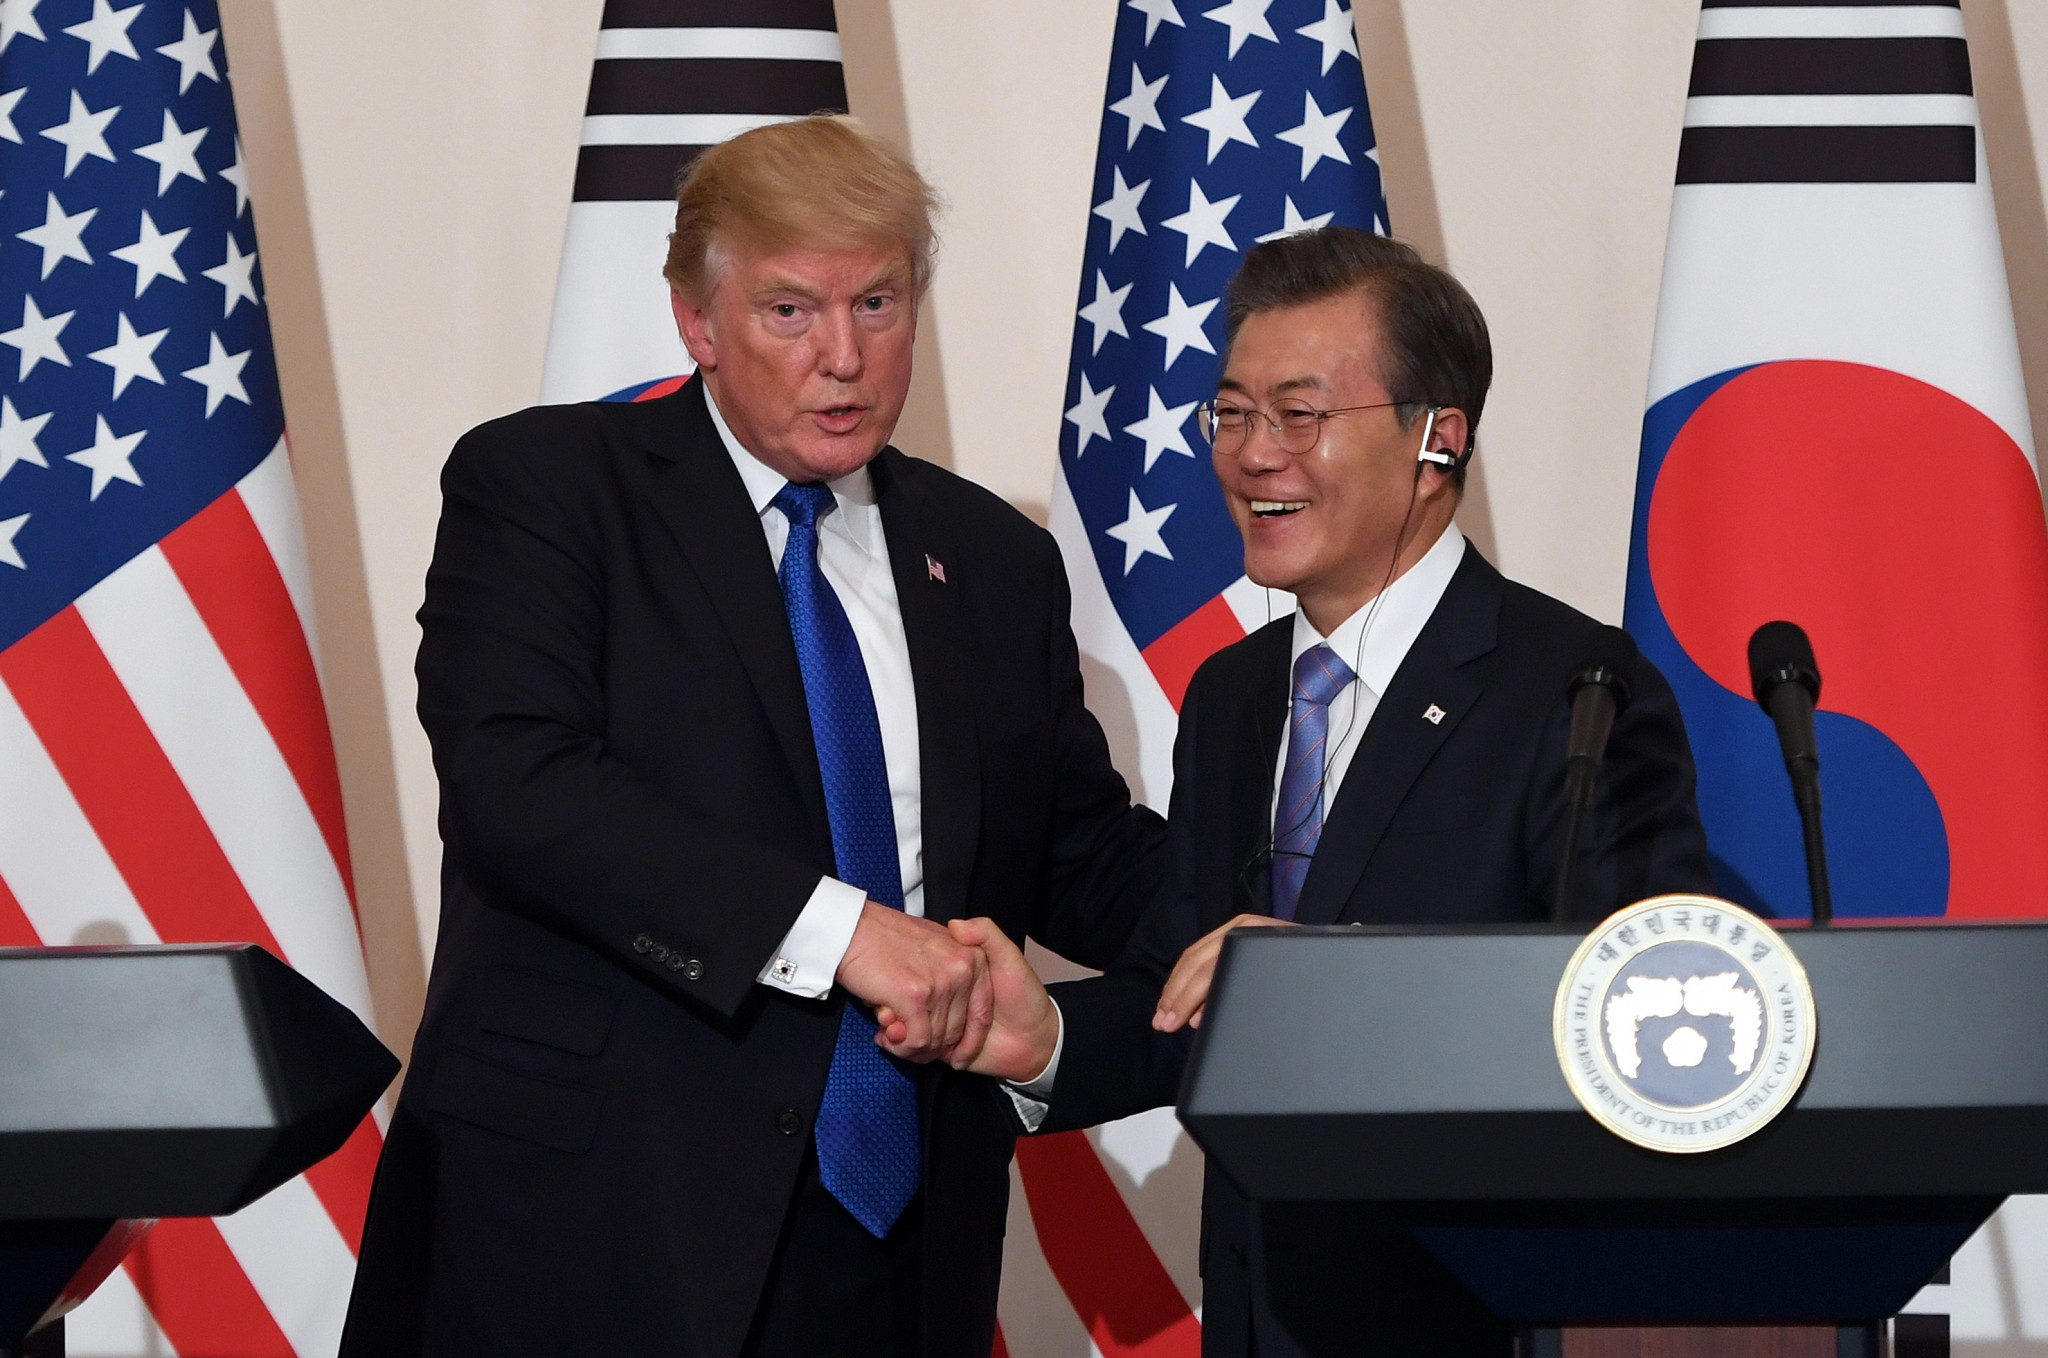 South Korea President says US counterpart Donald Trump has pledged to help ensure safety of Pyeongchang 2018